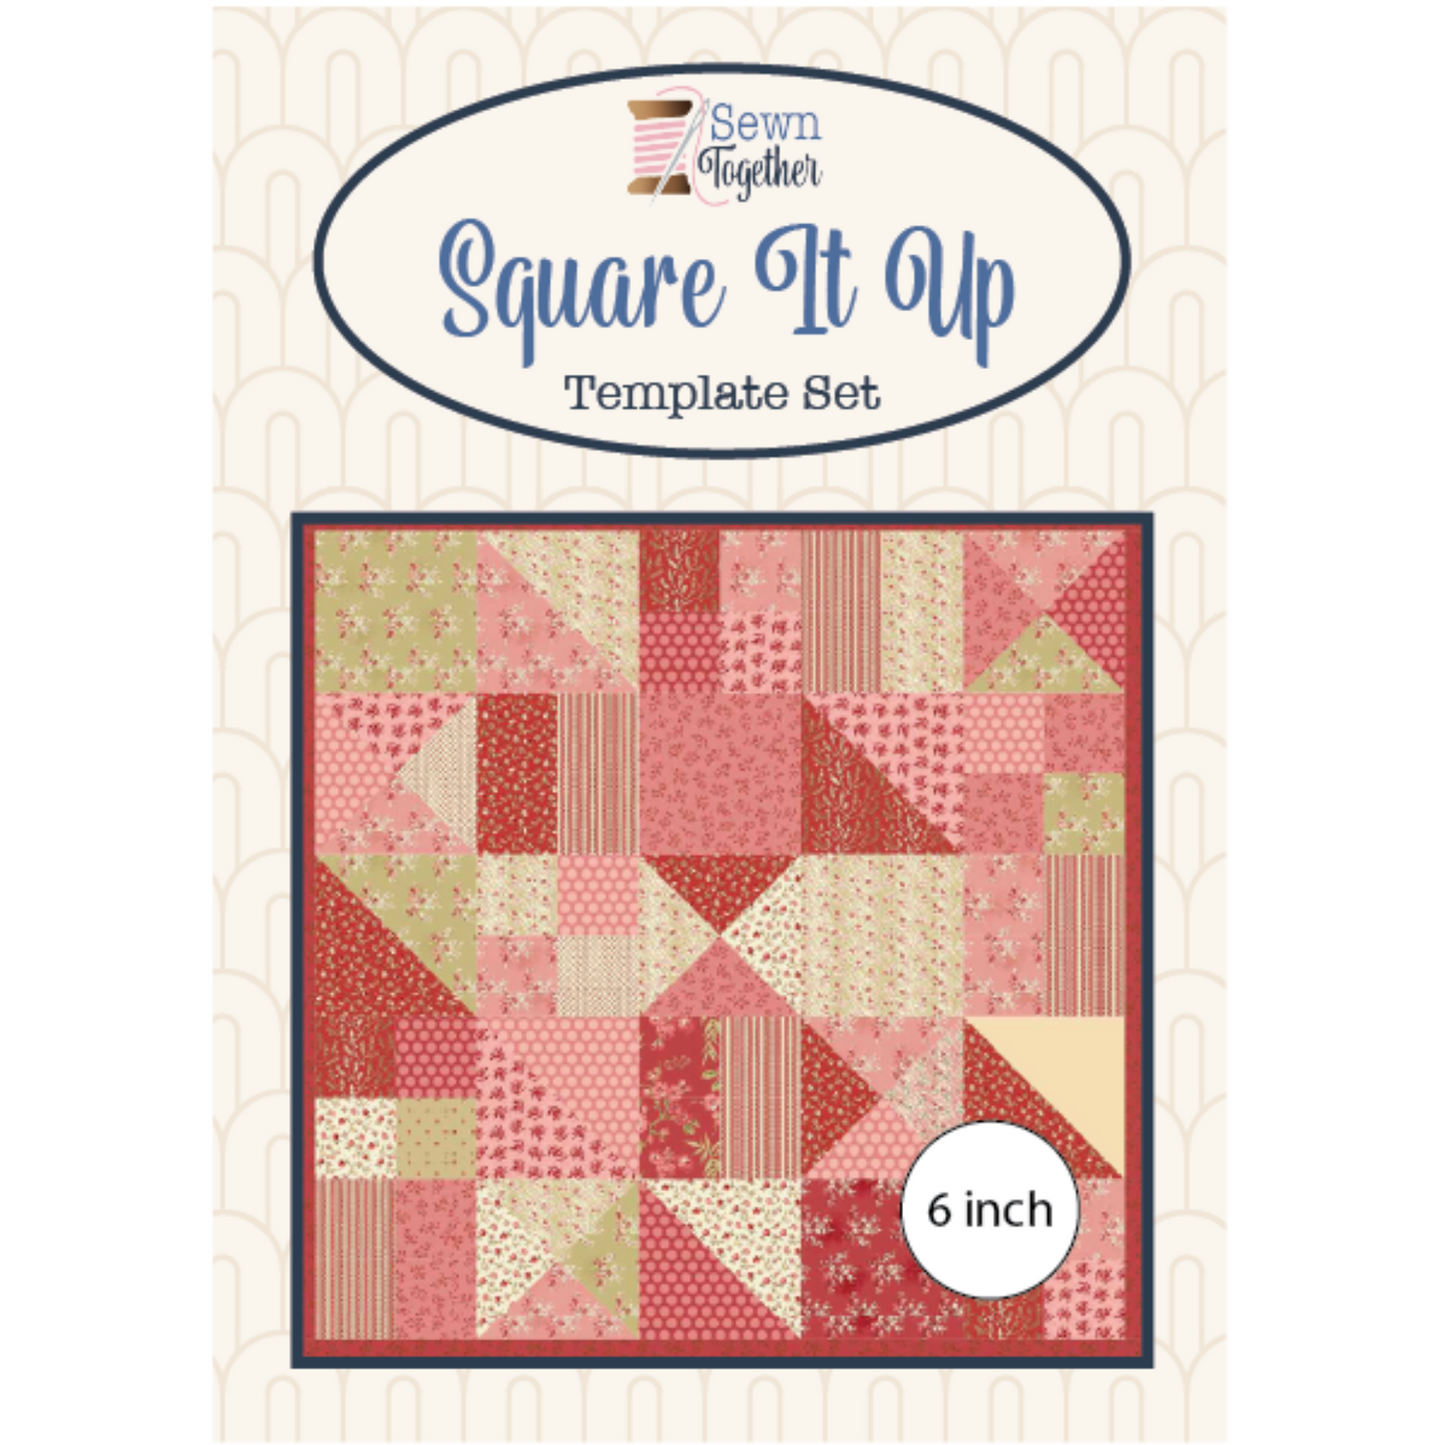 Square It Up Template Set 6 inch